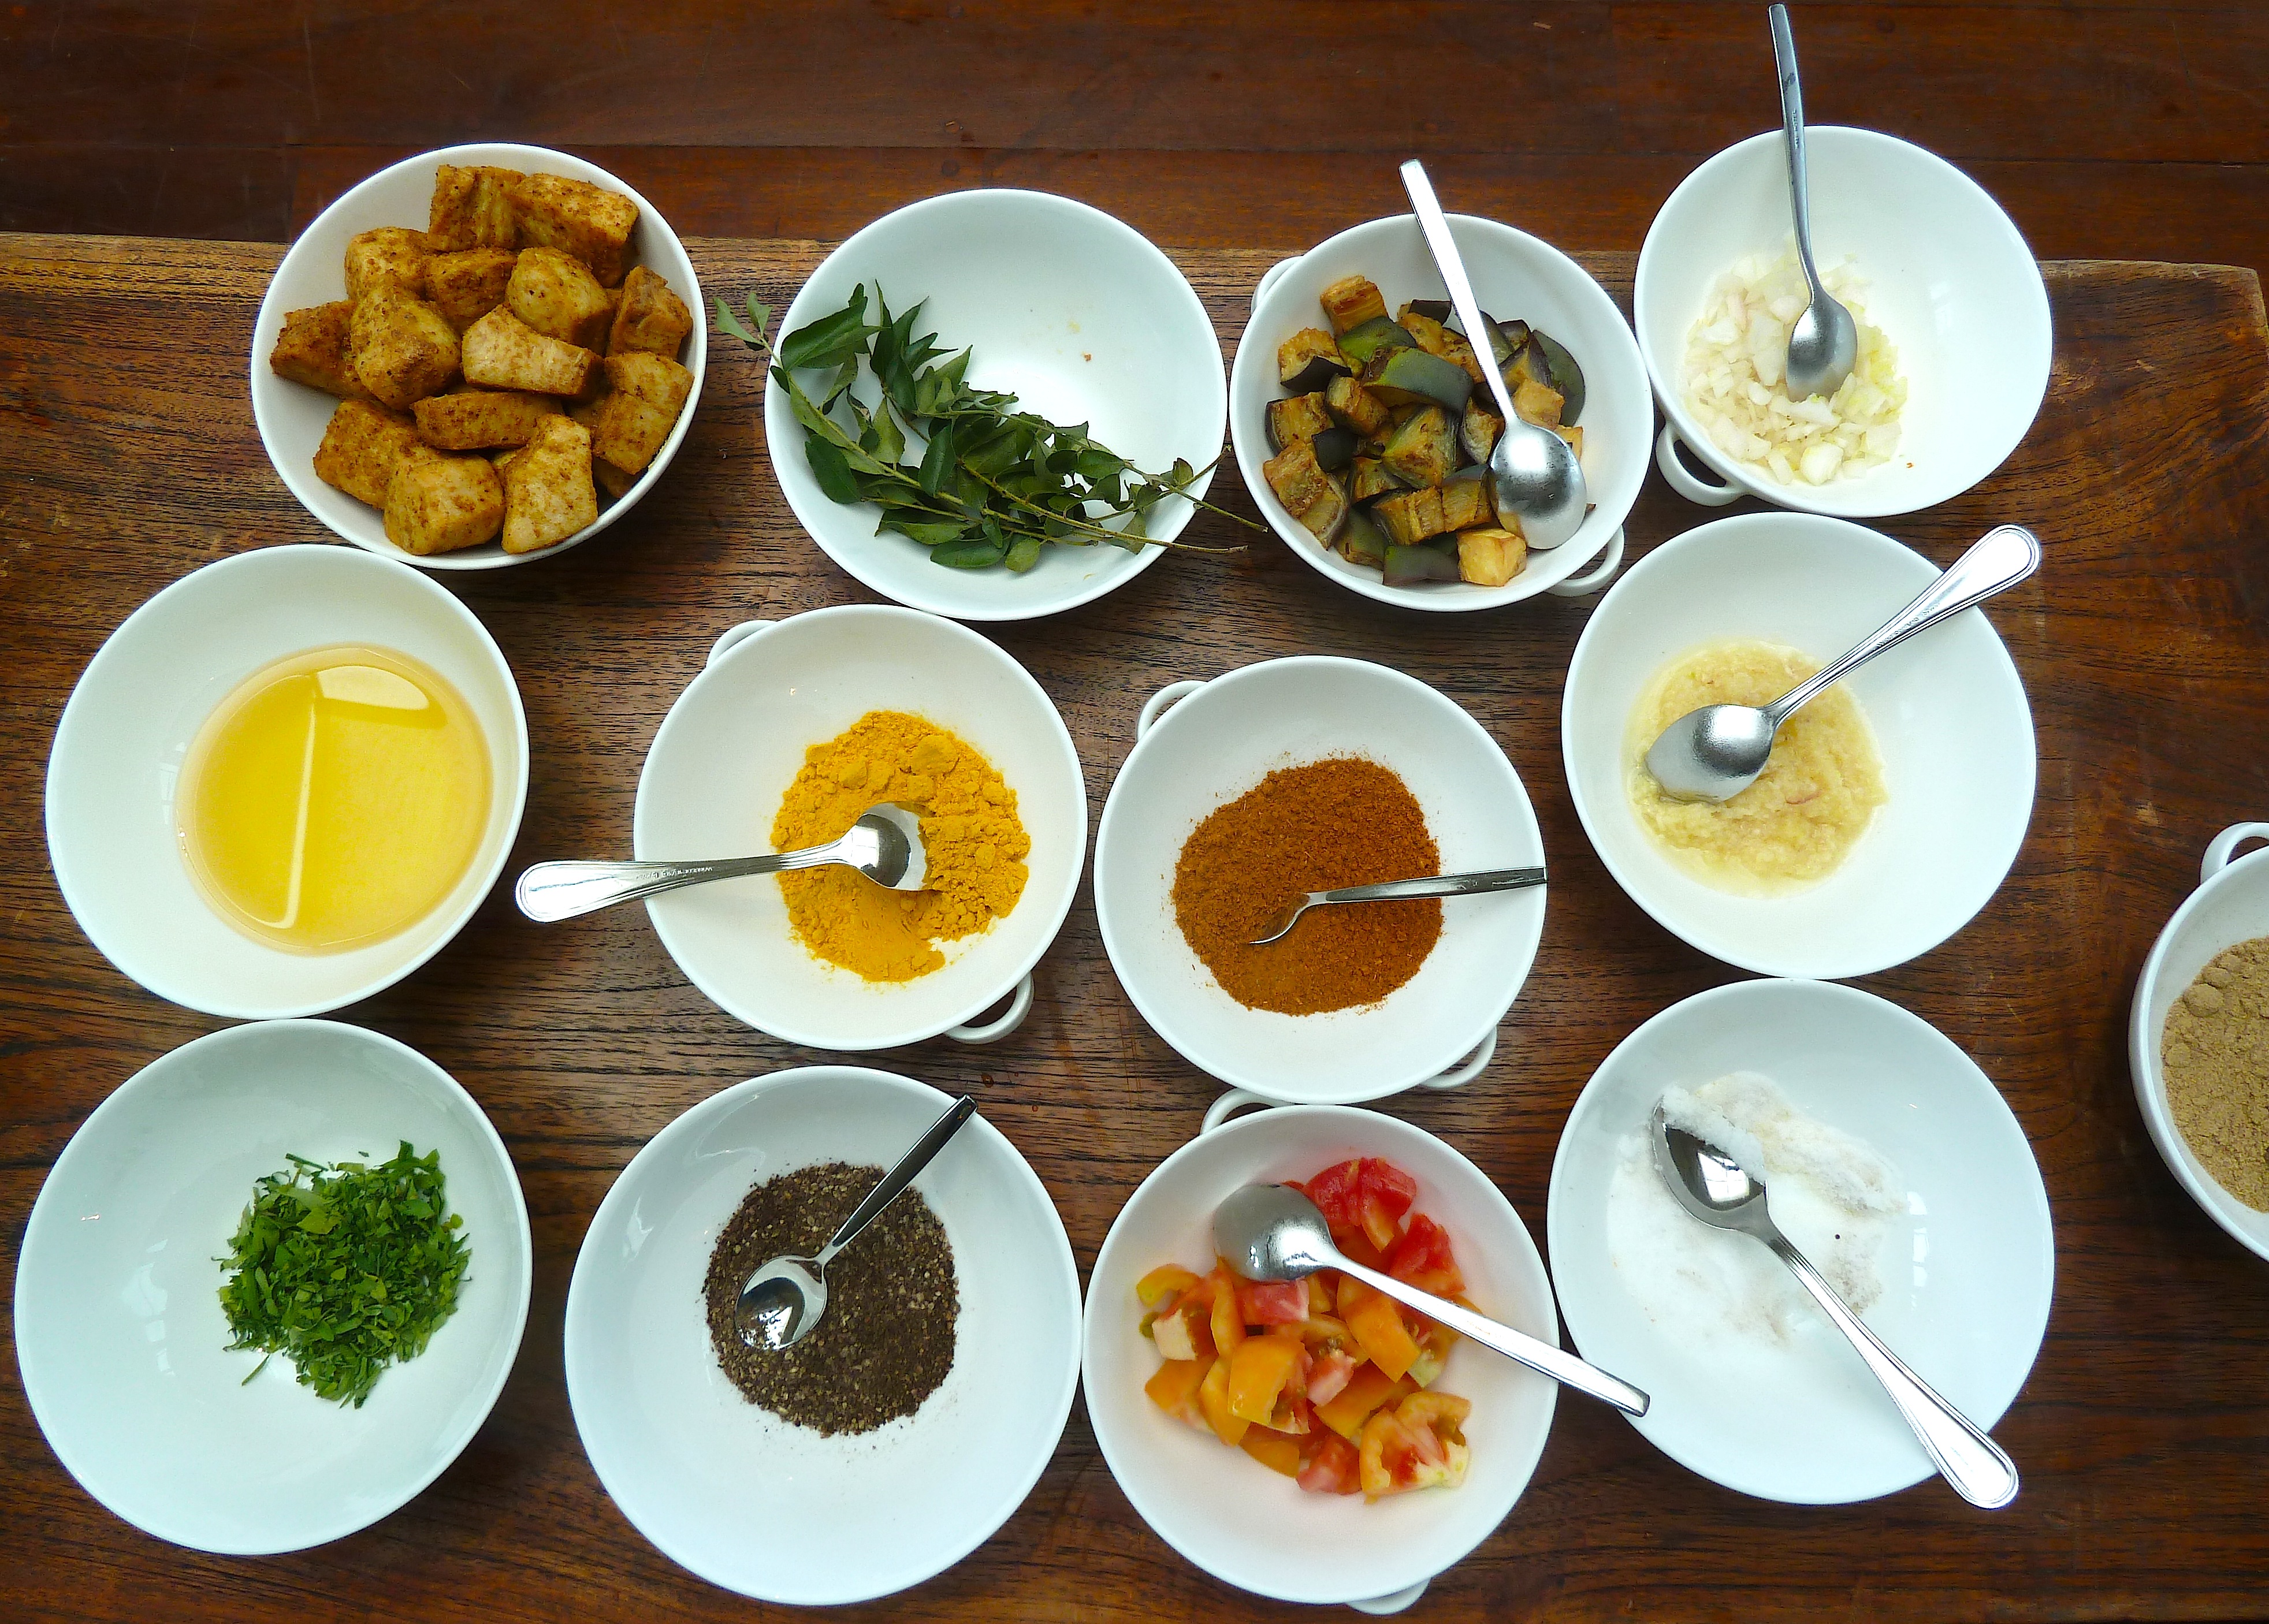 Food Specialties of the Seychelles